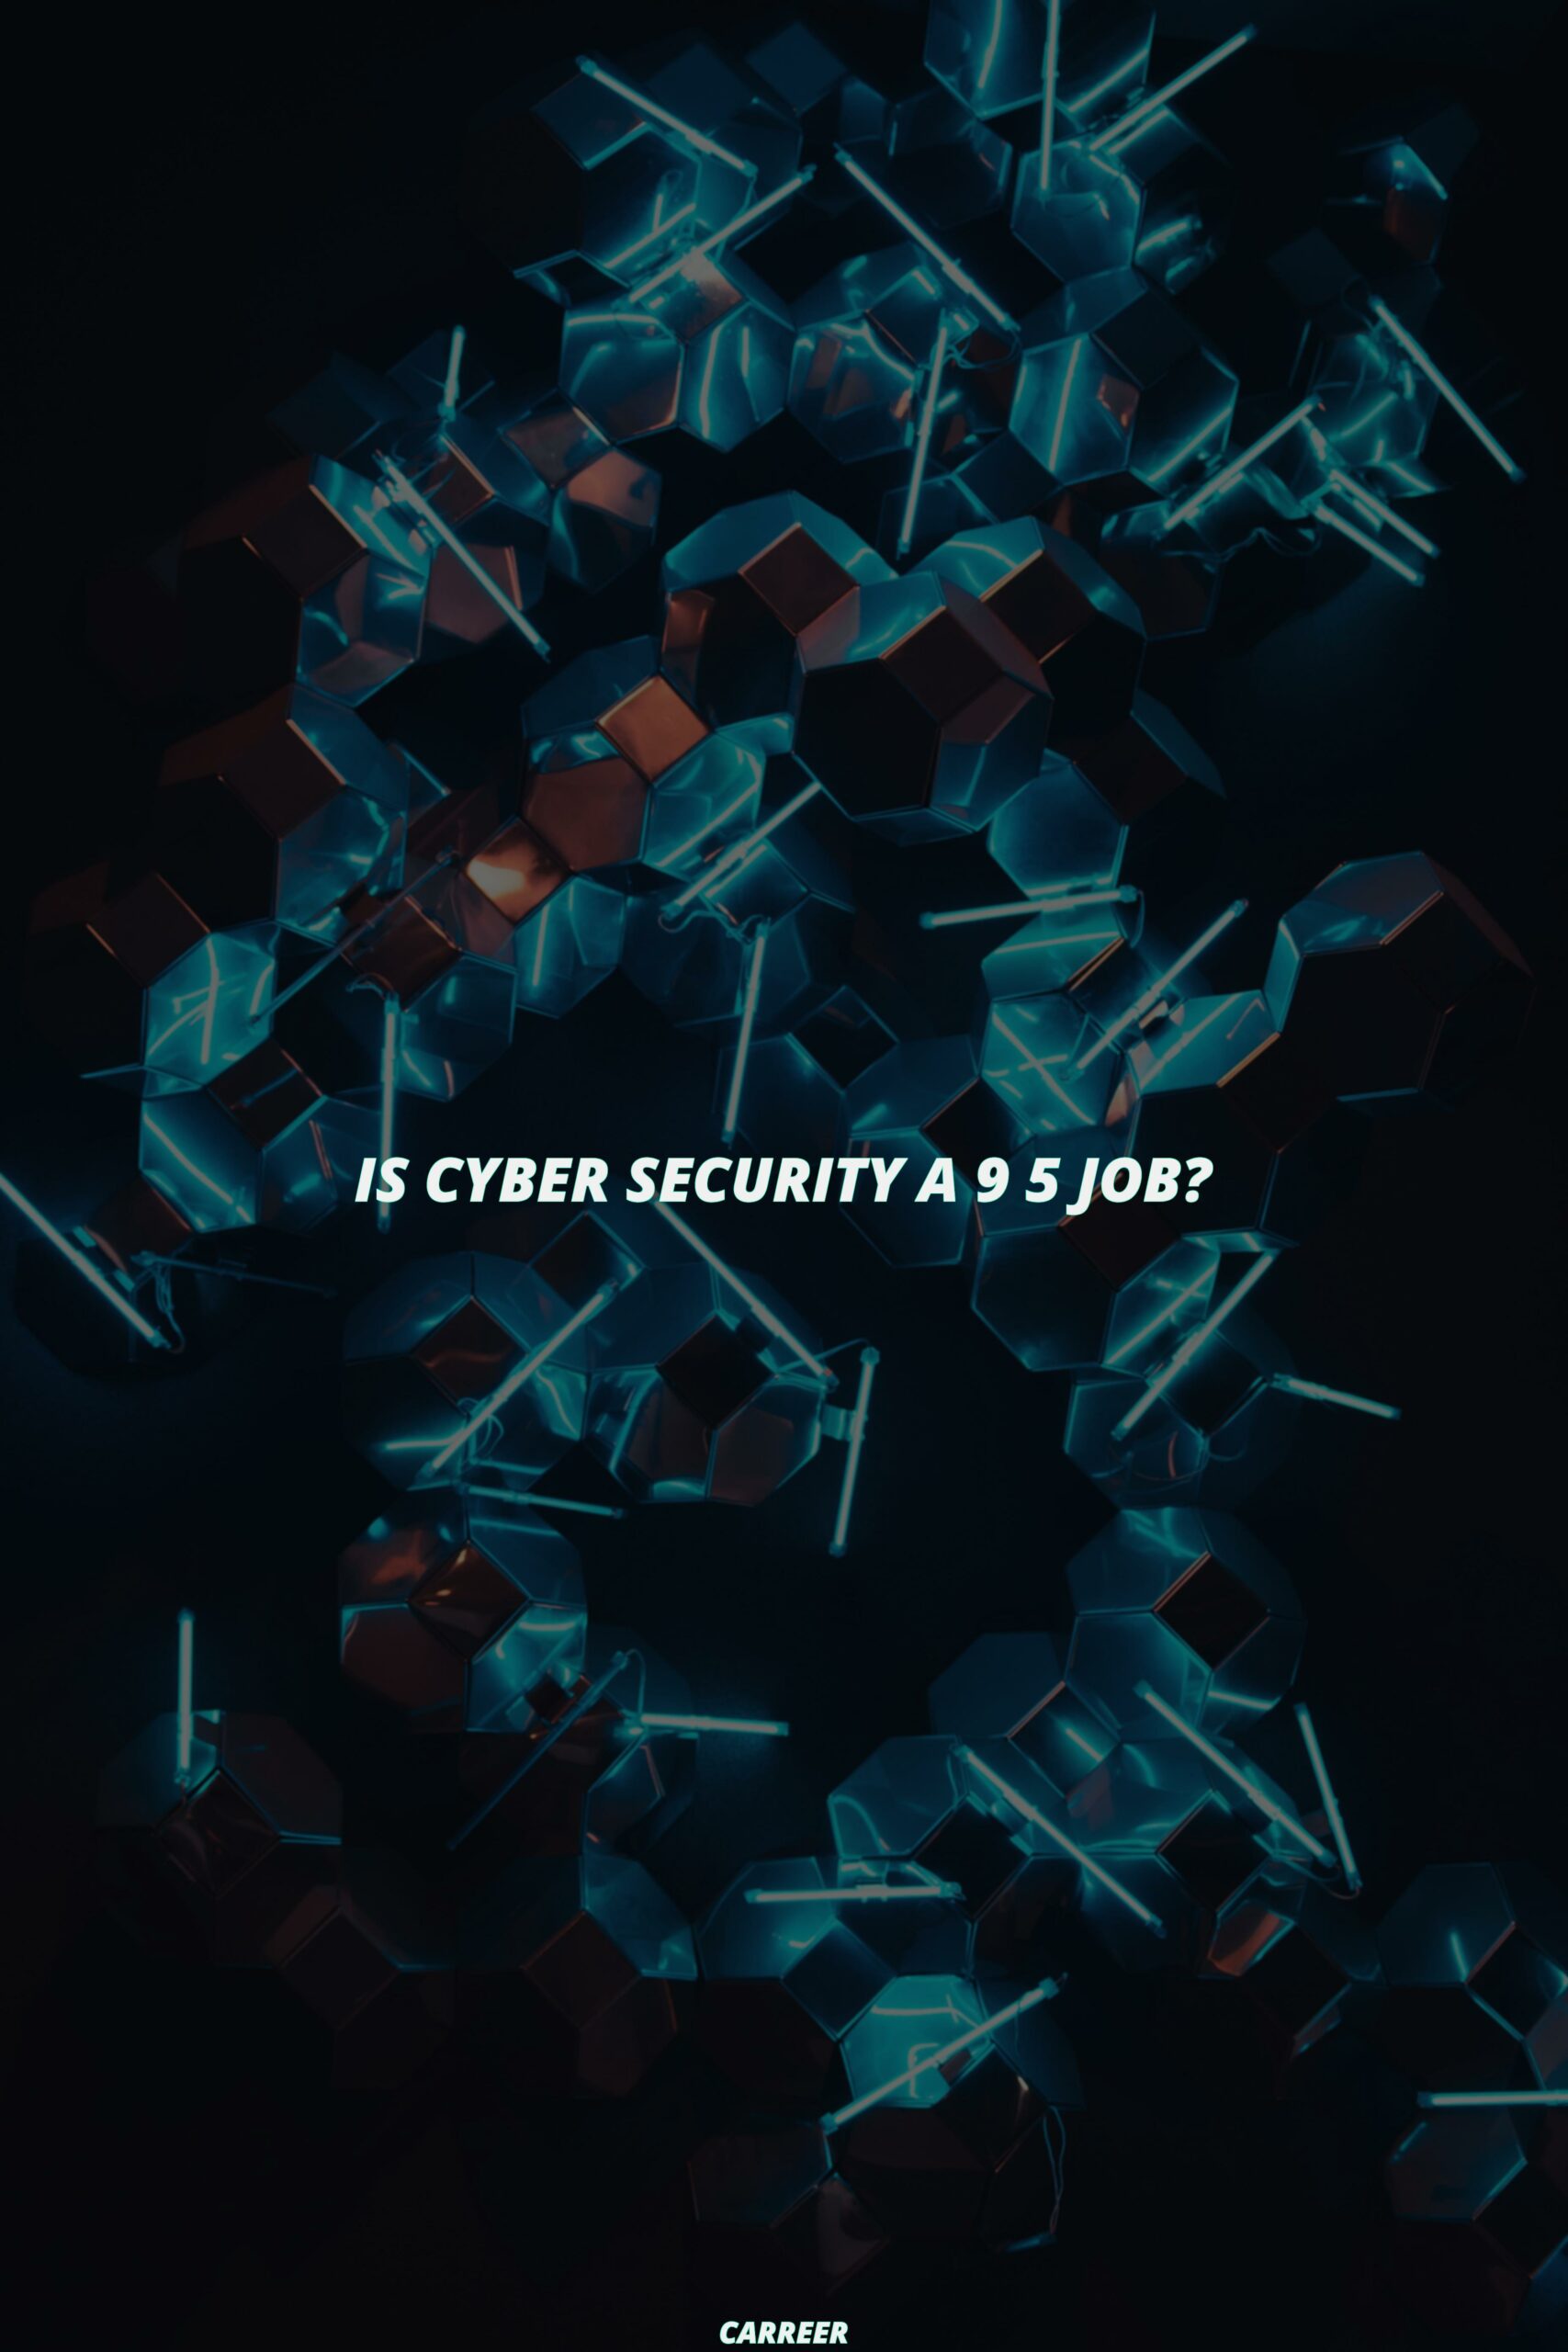 Is cyber security a 9 5 job?